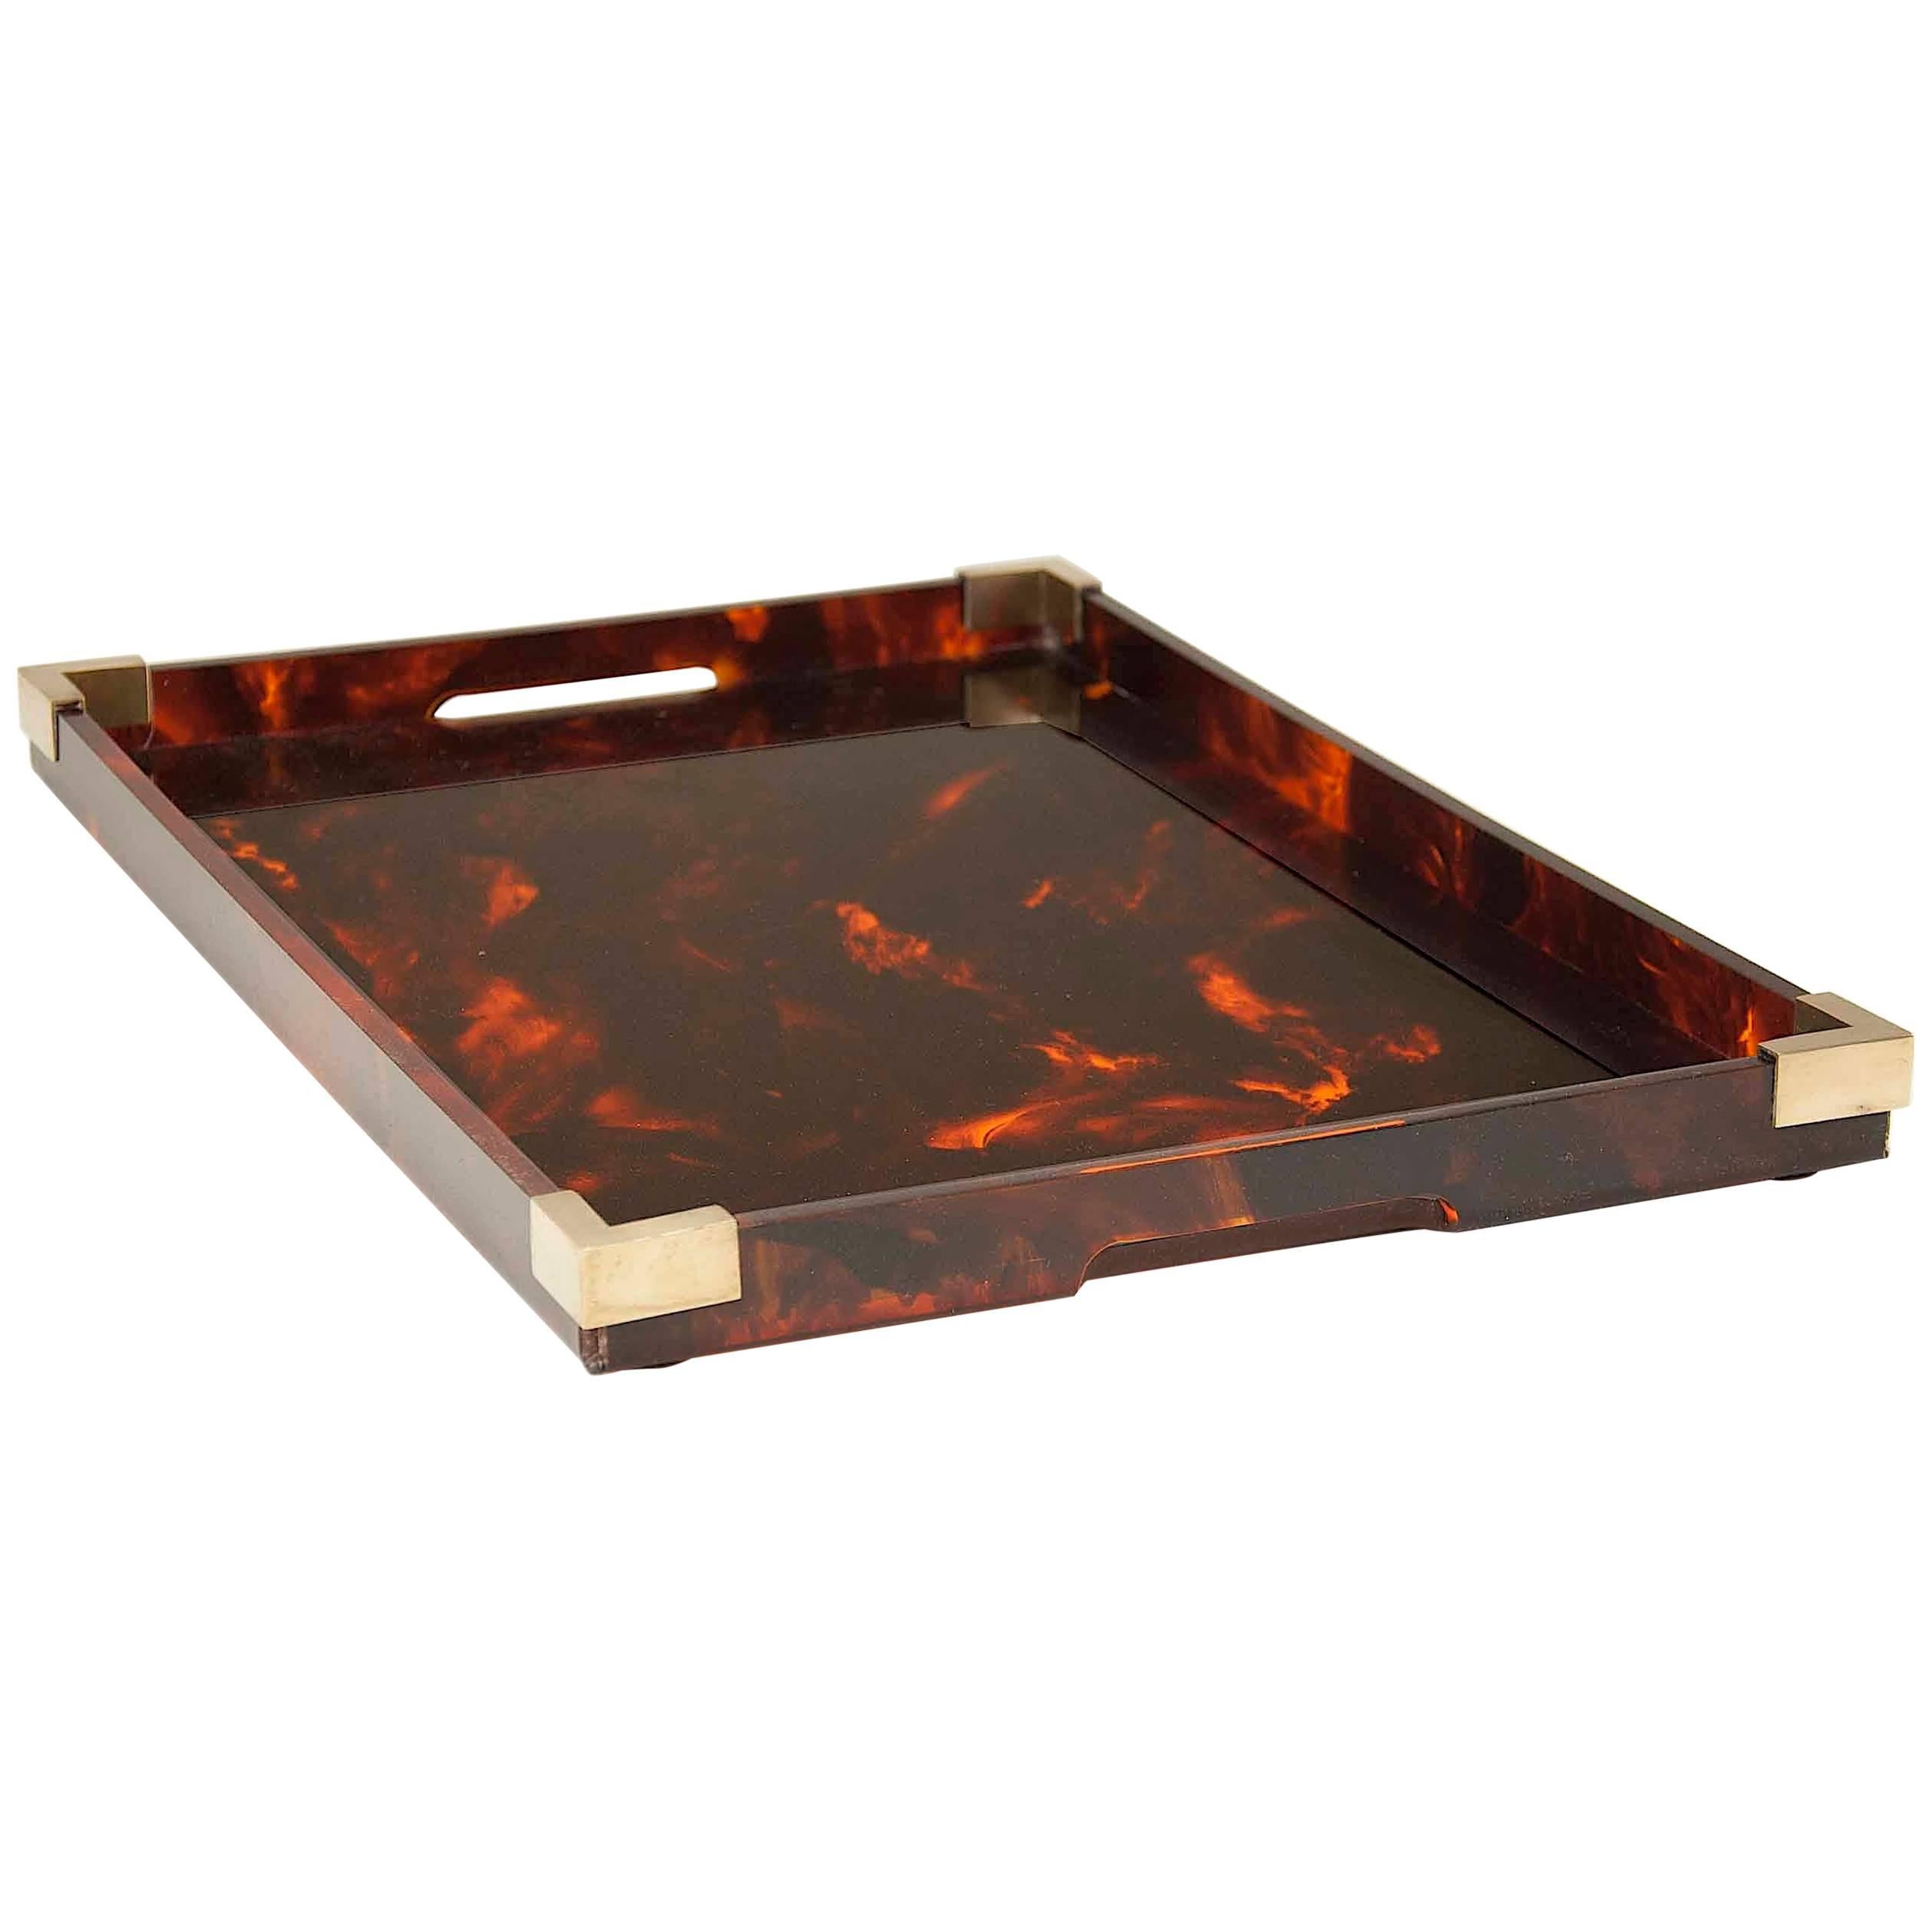 Serving Tray Tortoise Lucite and Brass Attributed to Dior Home Collection